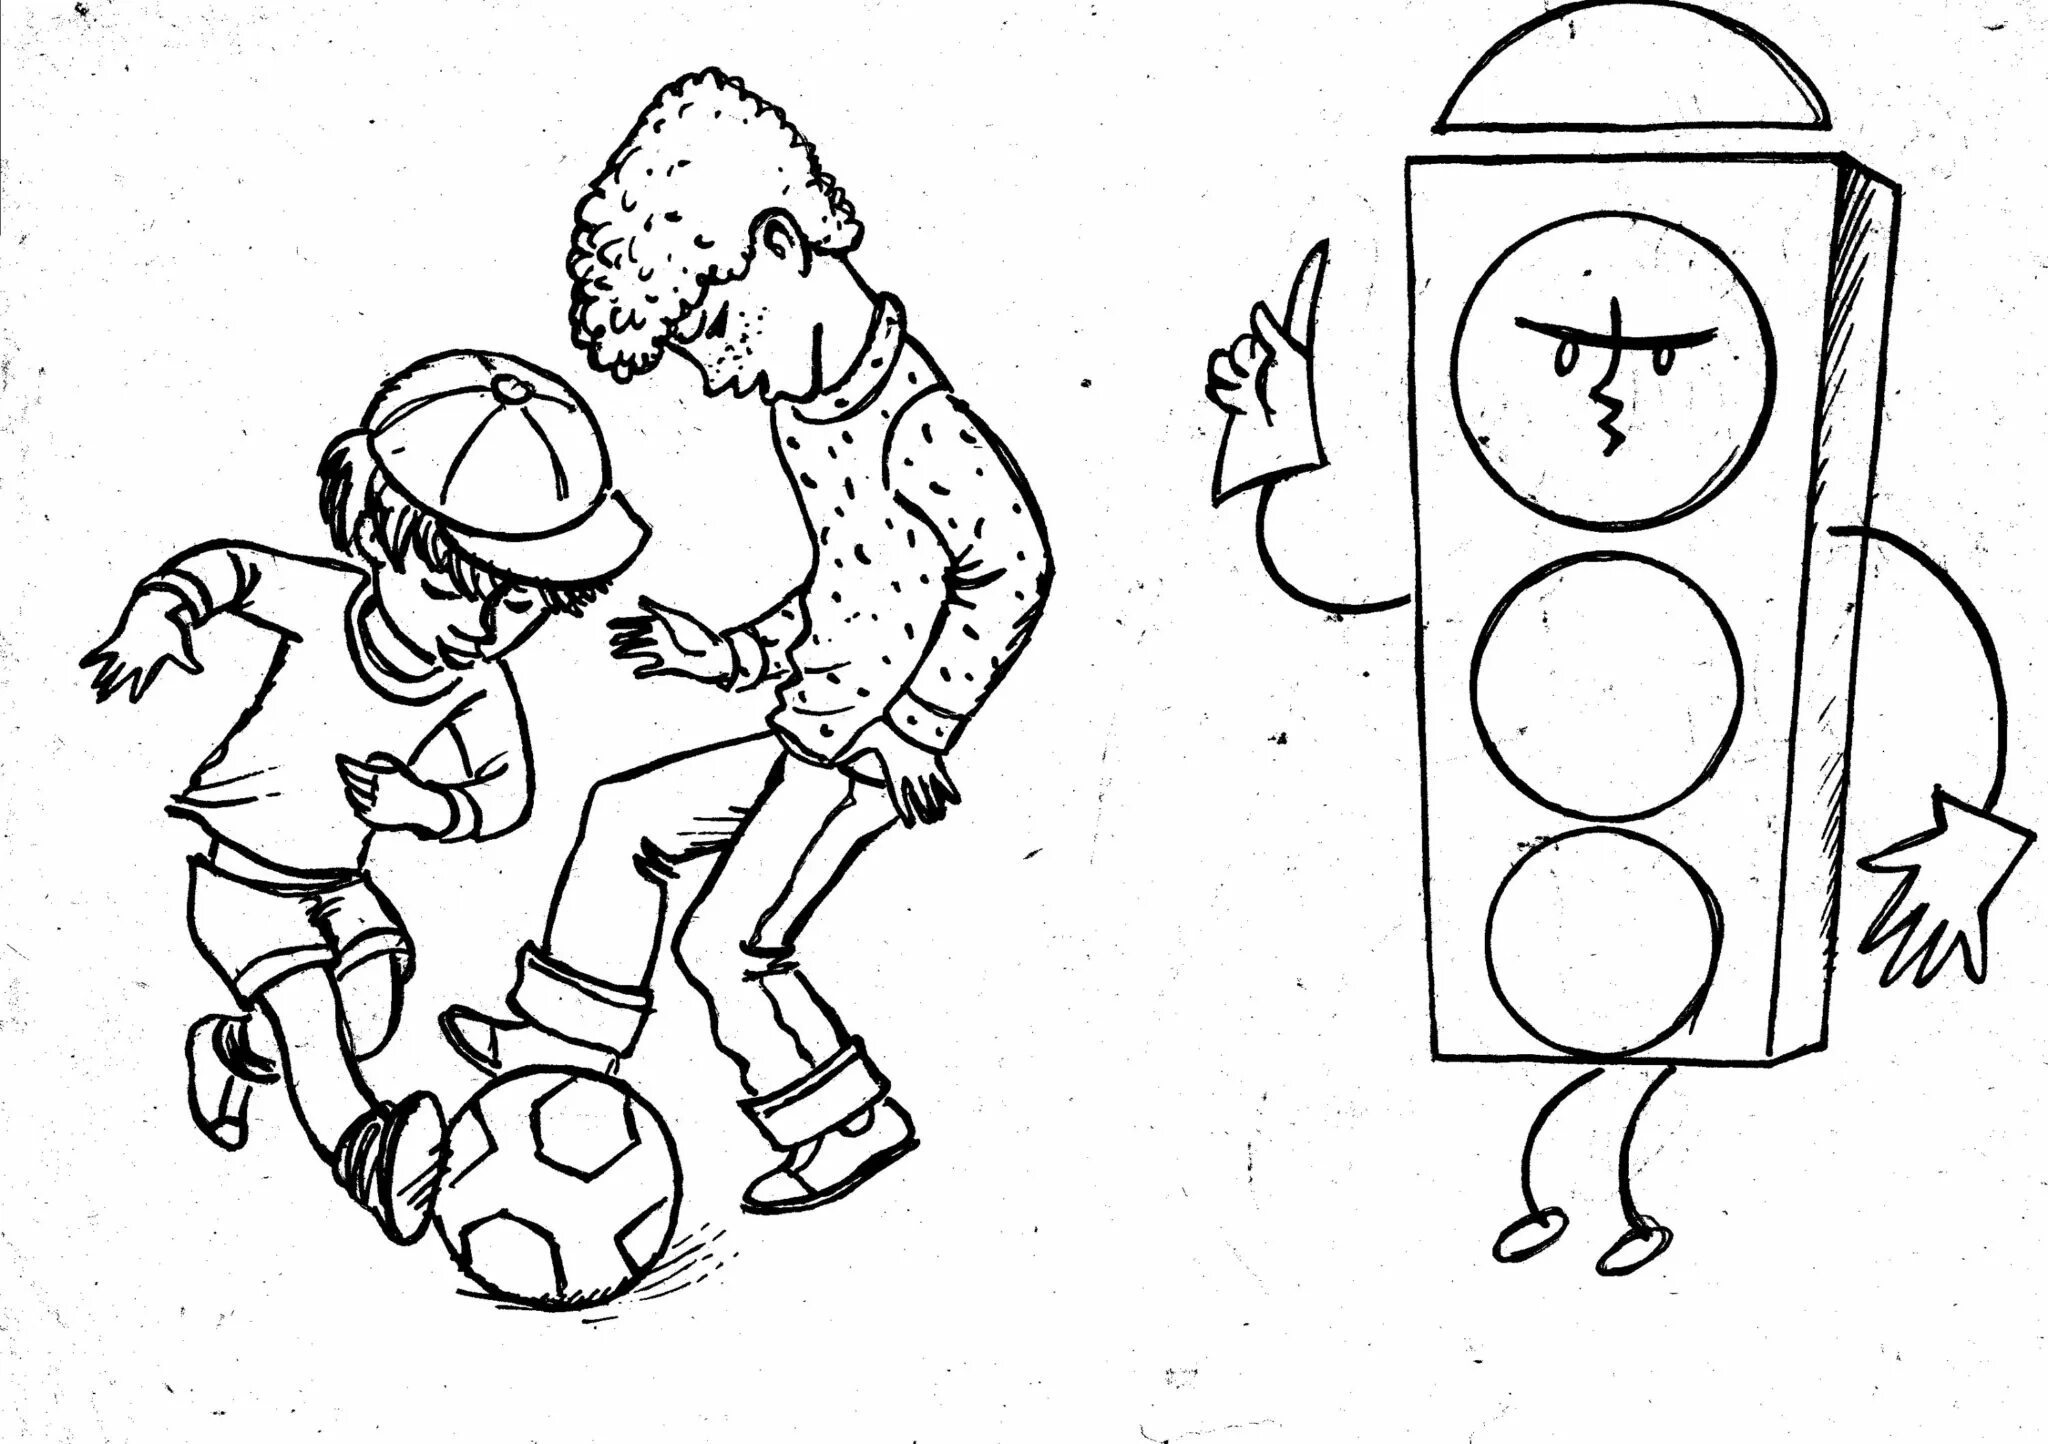 Exciting traffic safety coloring page for the little ones